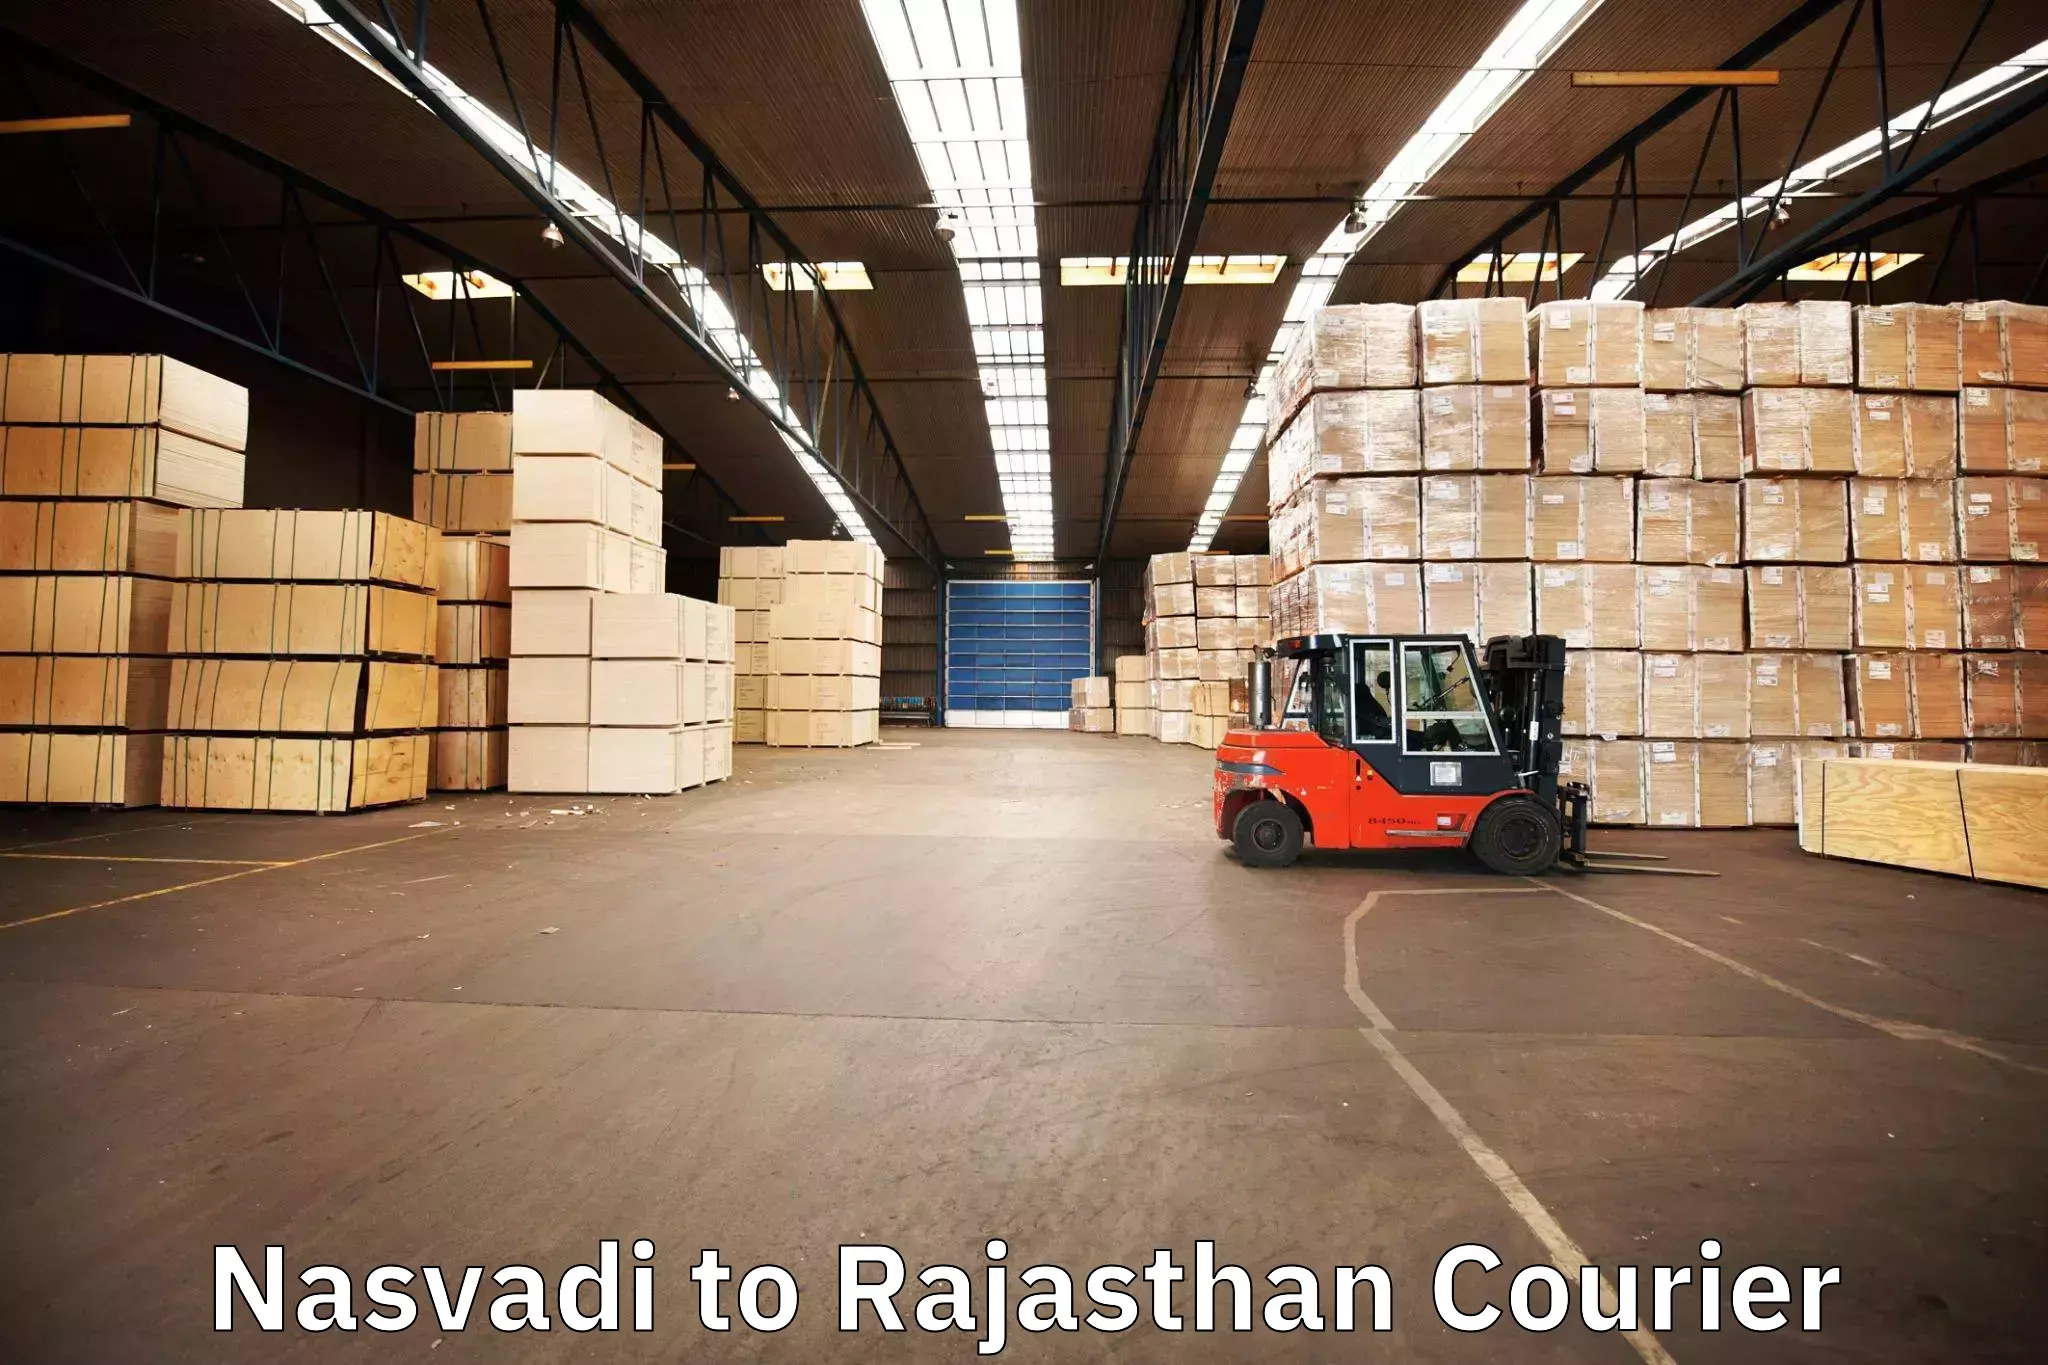 Trusted relocation experts Nasvadi to Rajasthan